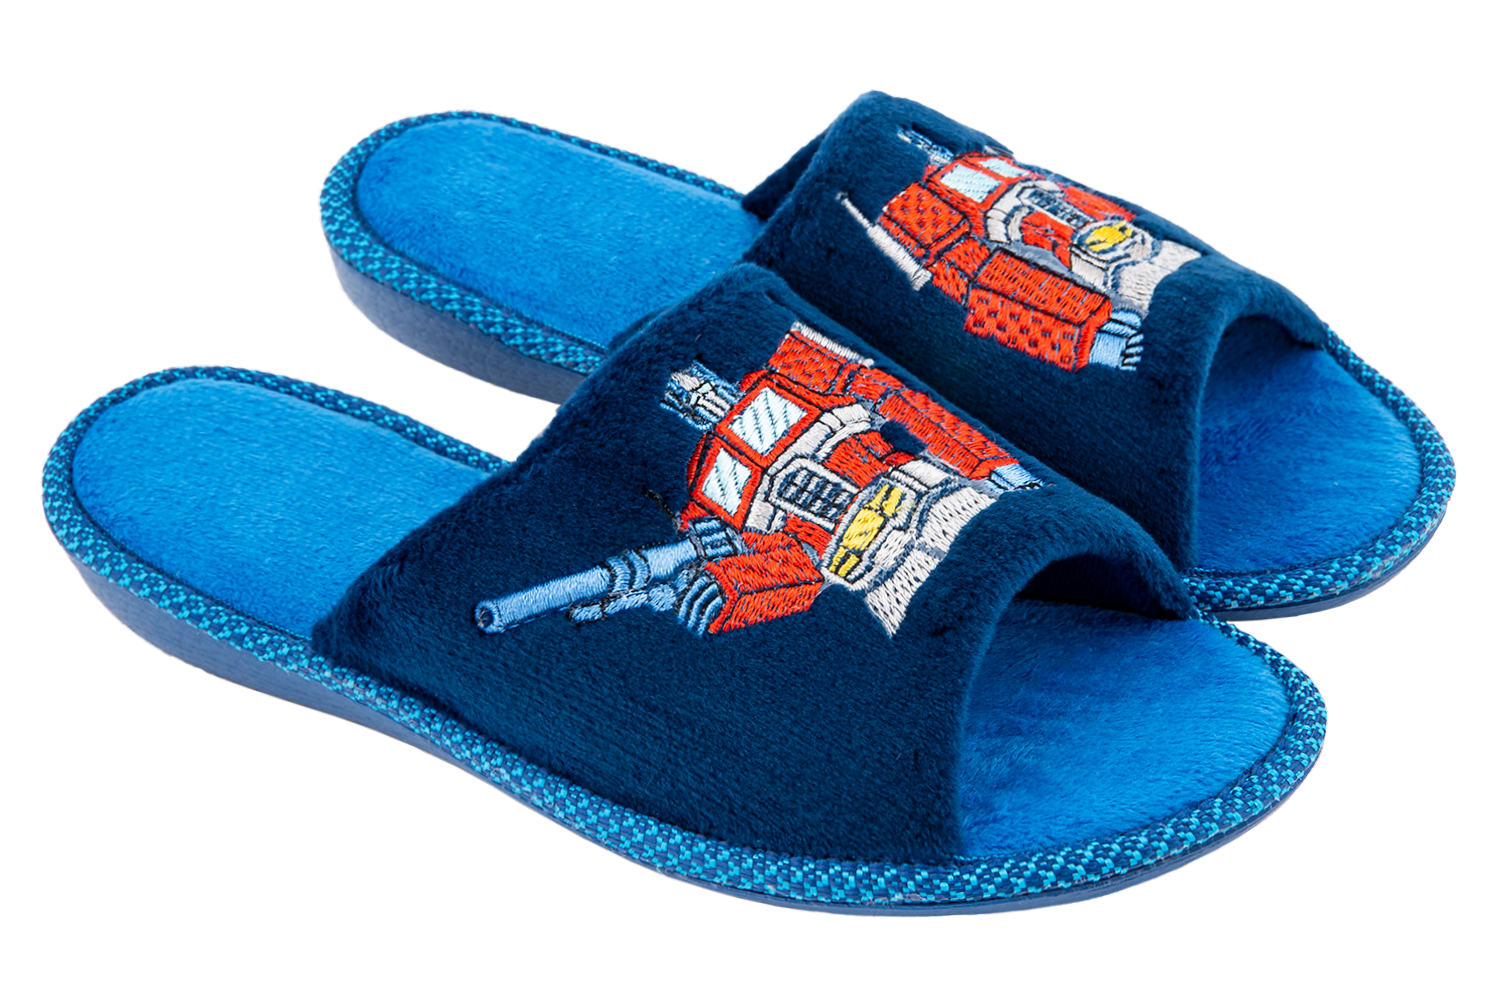 Children's velour slippers with embroidery - 1